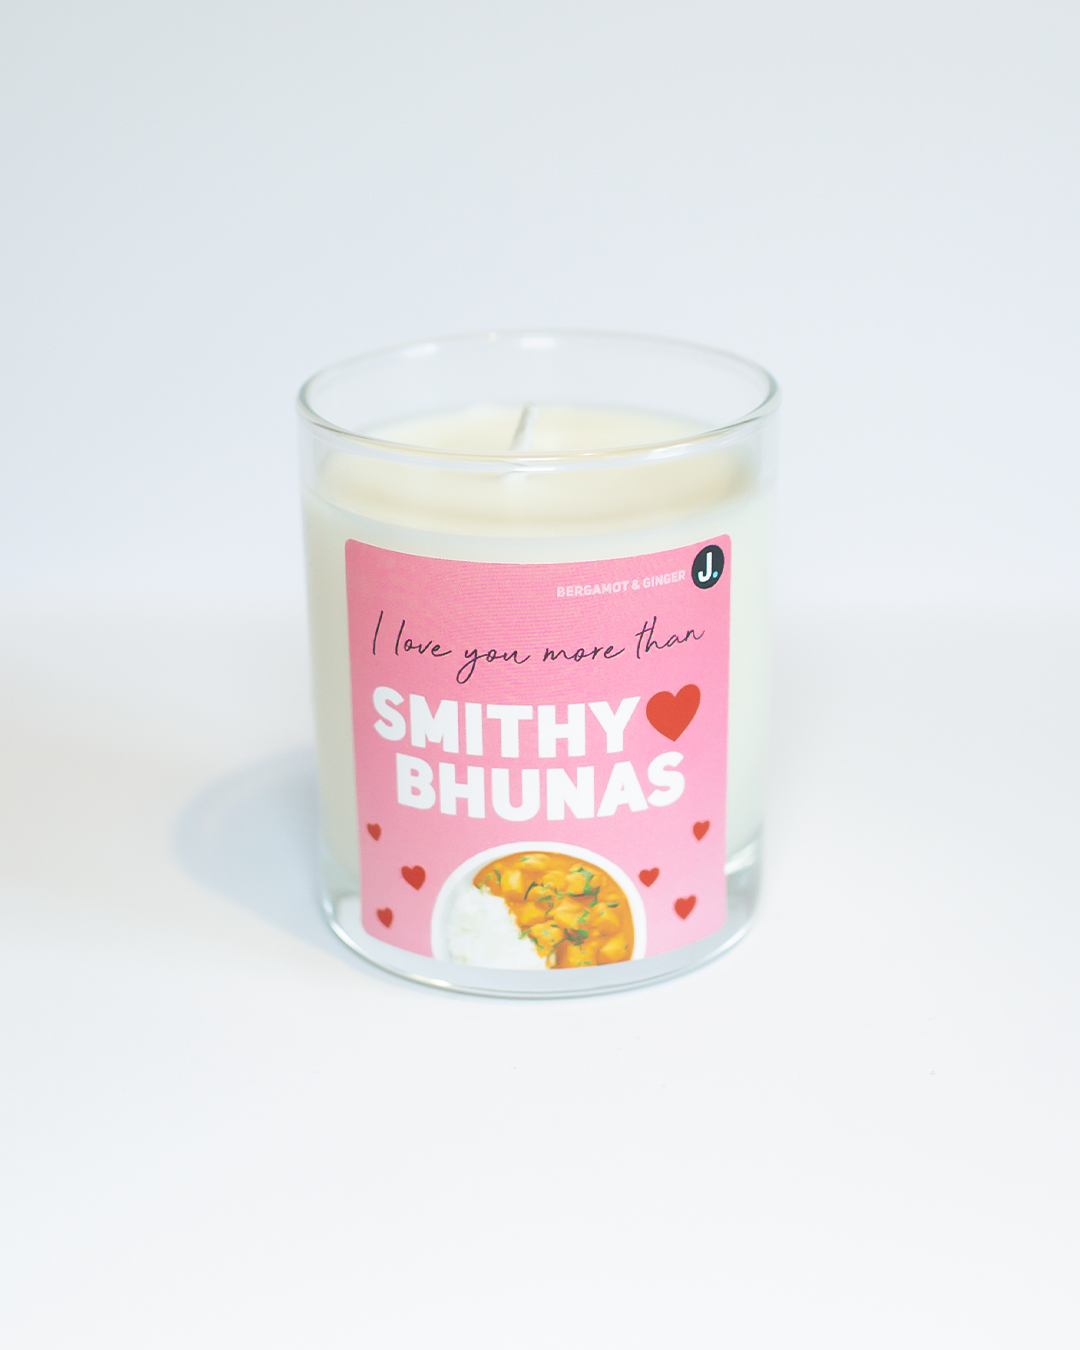 Gavin and Stacey Inspired Candle - Smithy & Bhunas (Bergamot & Ginger) Gavin and Stacey Inspired Candle